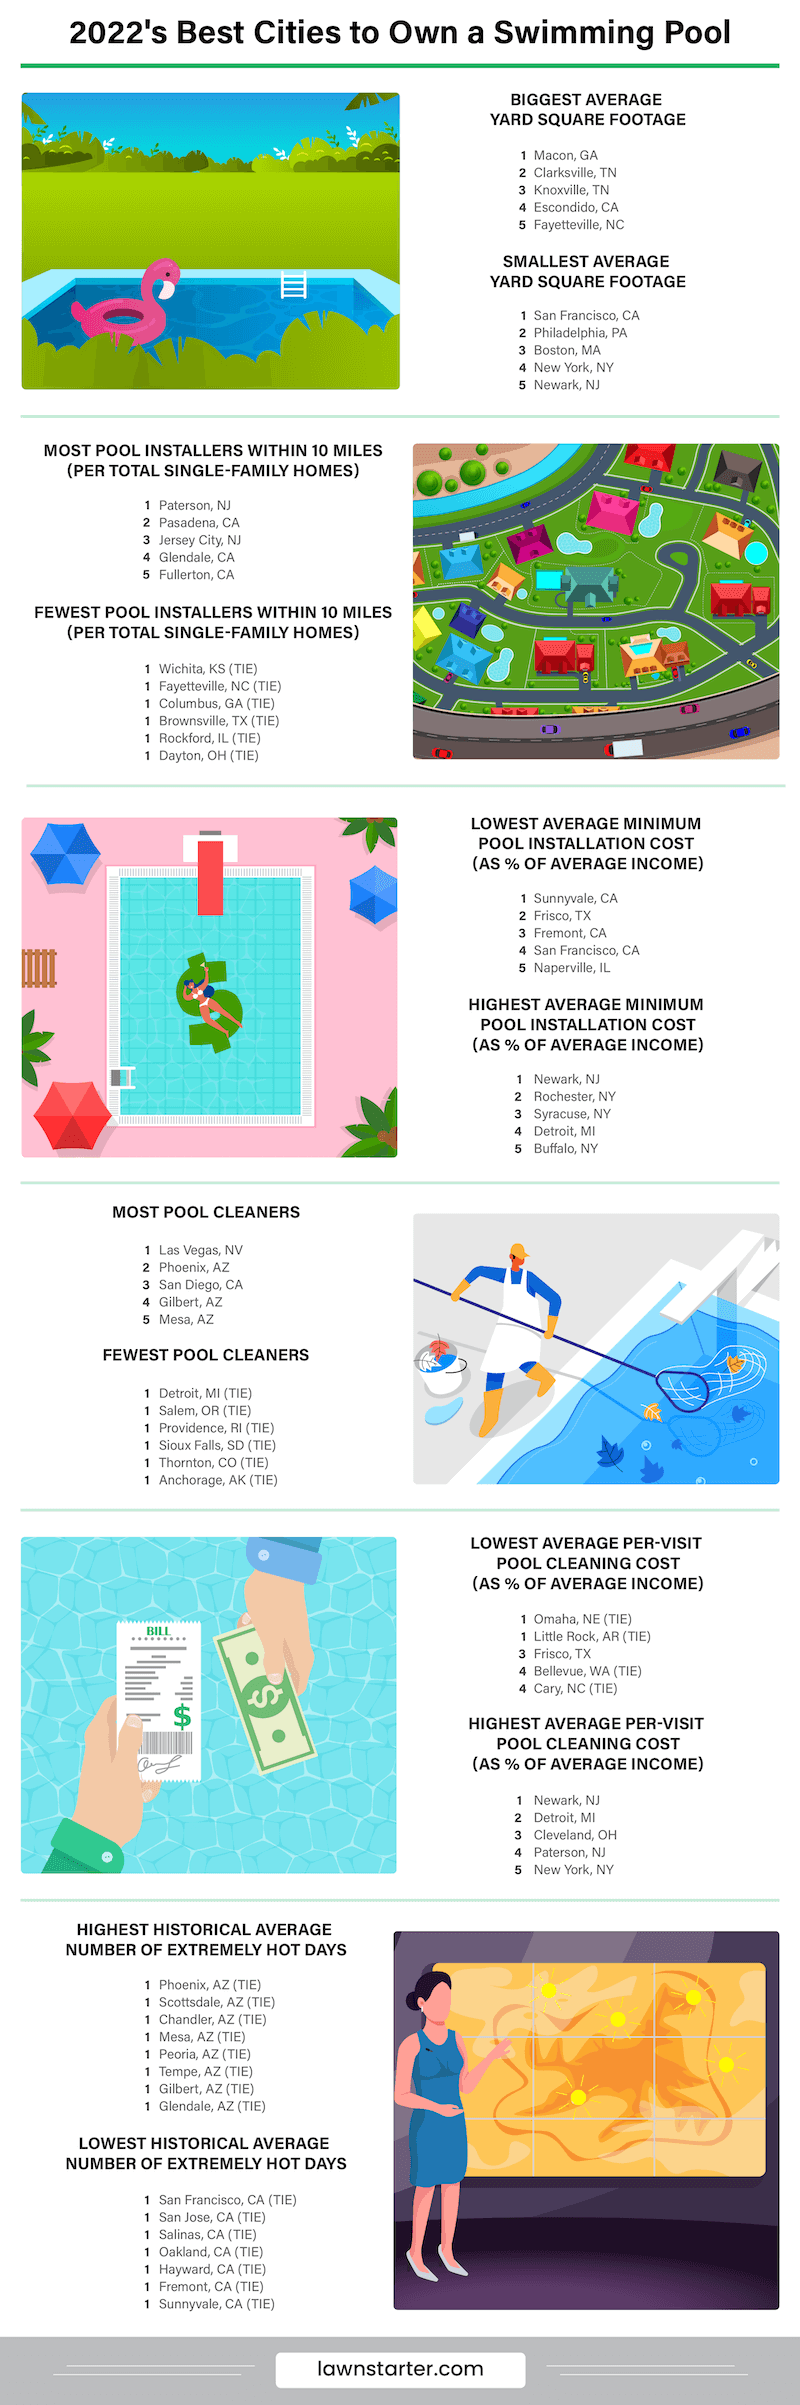 Infographic showing the best cities to own a swimming pool, a ranking based on yard size, pool installation and maintenance access and costs, and climate